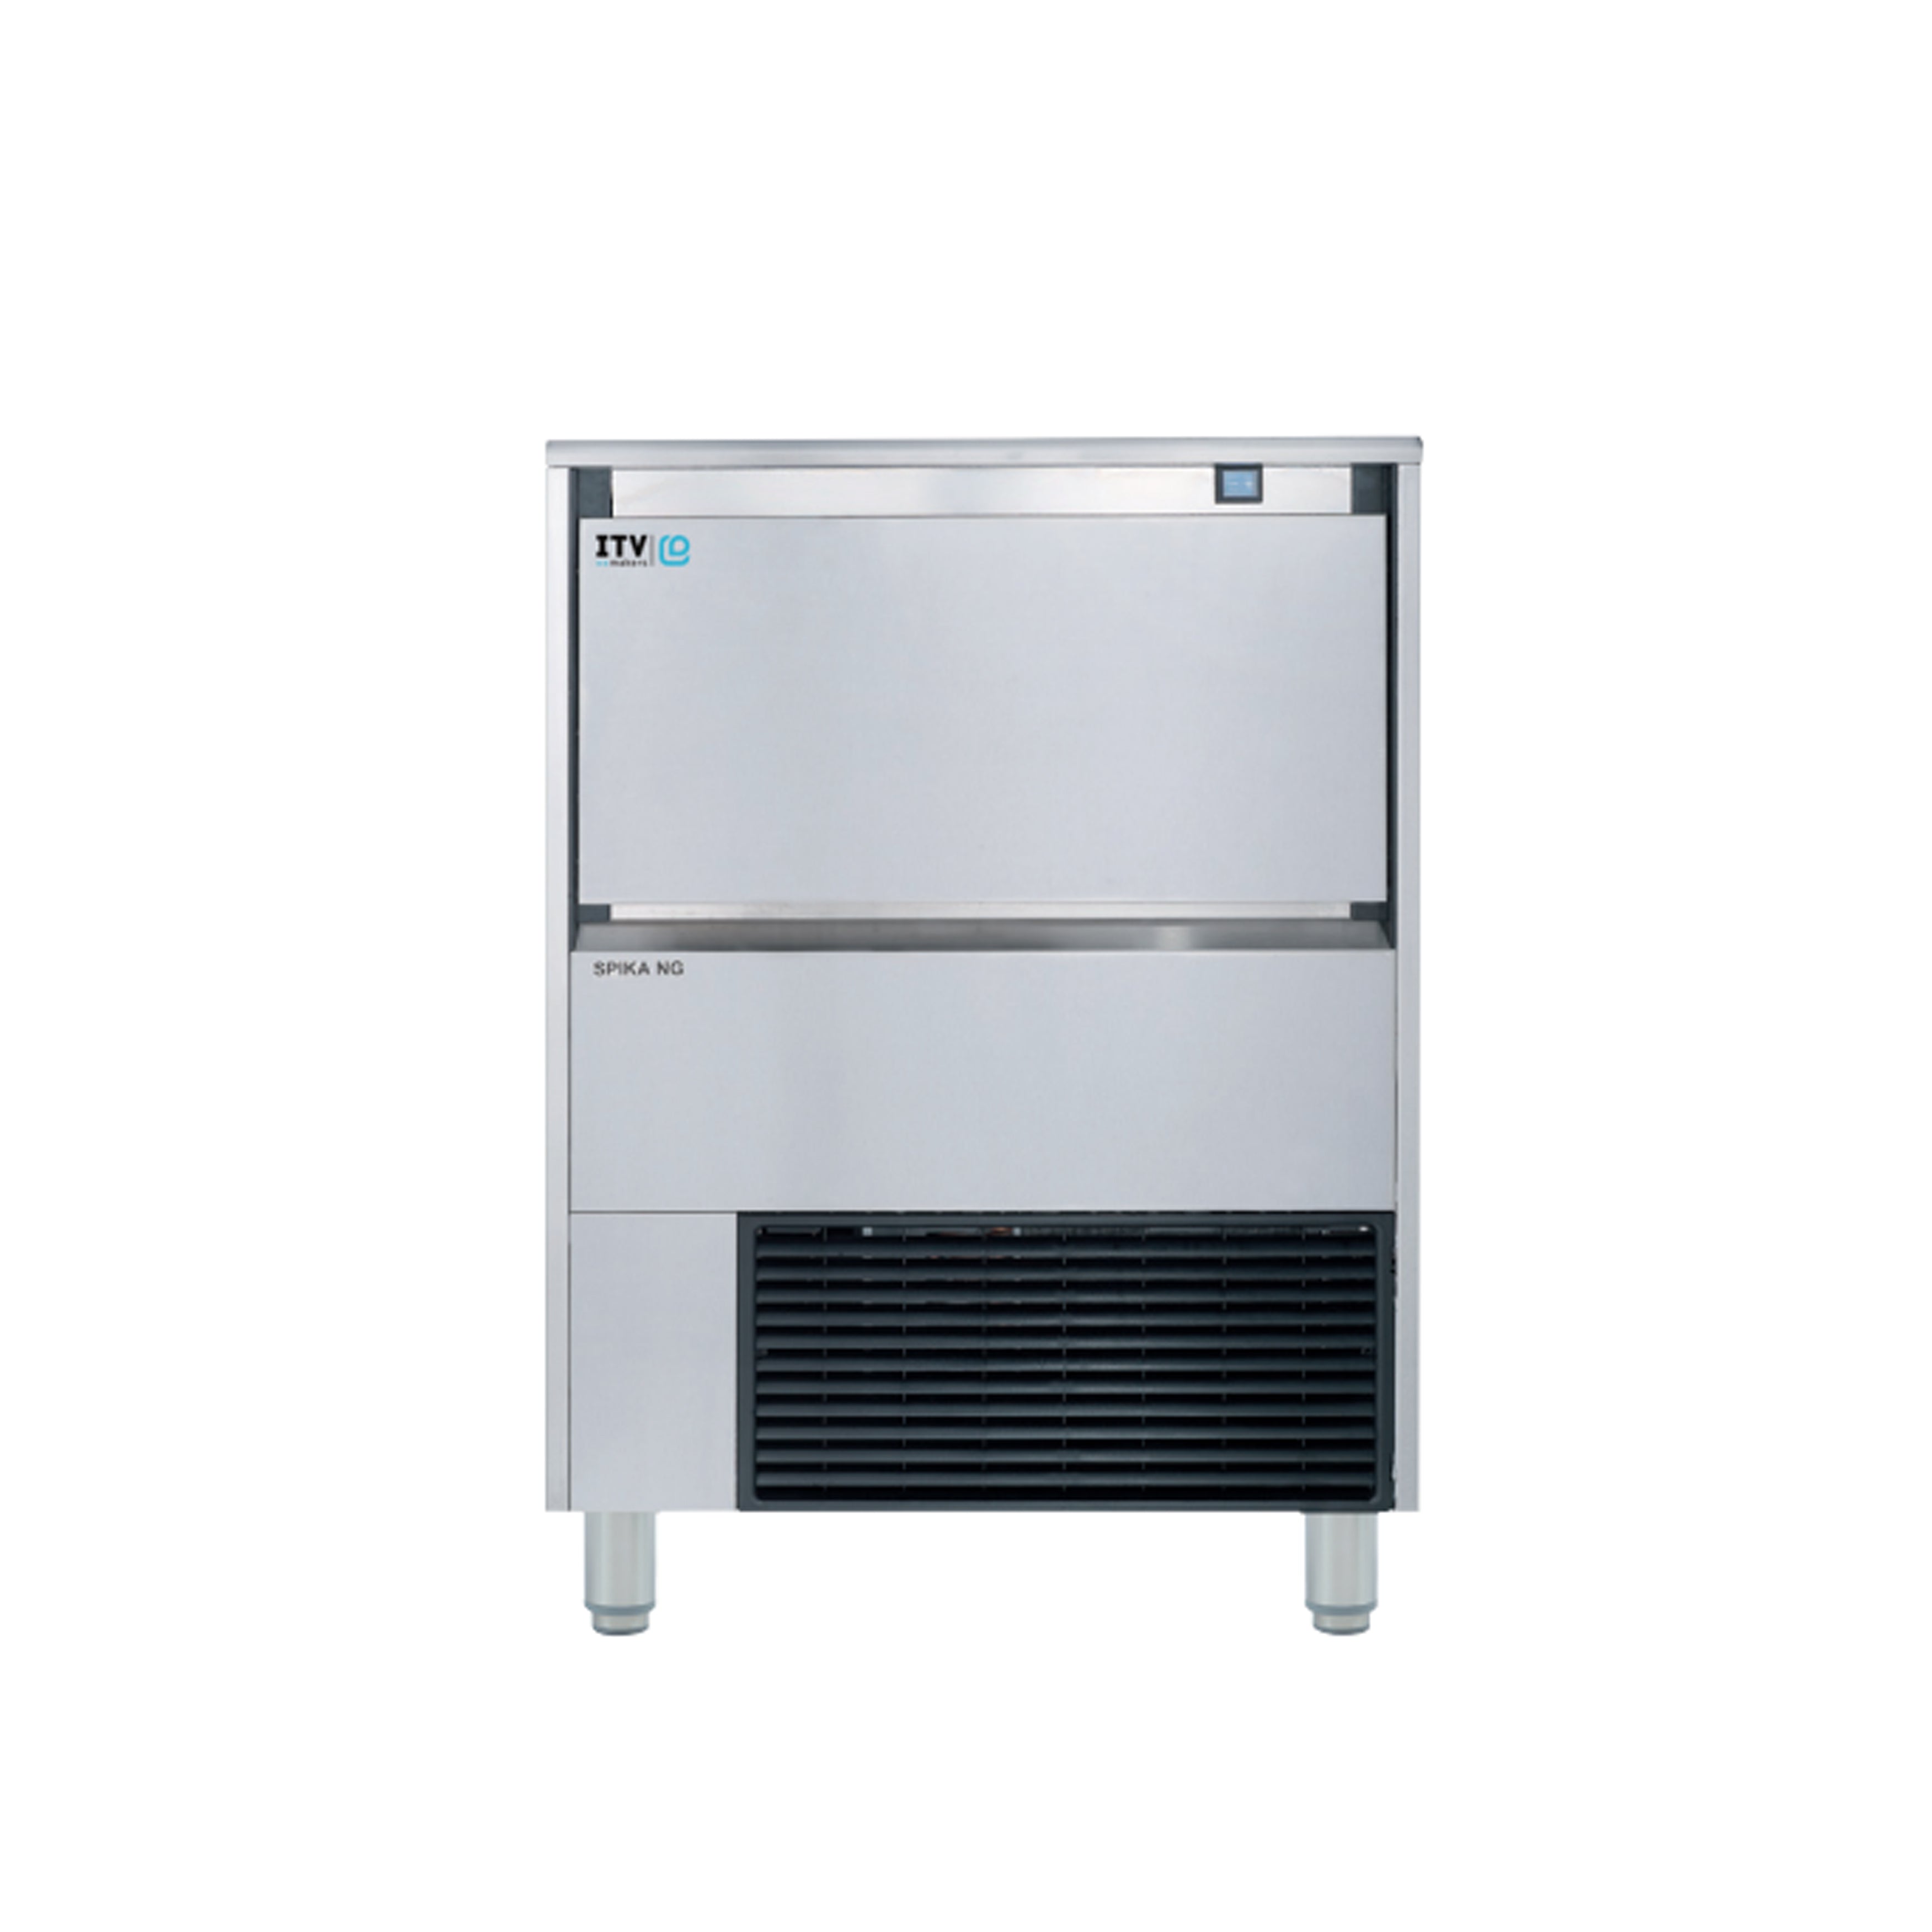 ITV - SPIKA NG 230, Commercial Spika Cubers under-counter Ice Maker Self-Contained Ice Cube Machine 231lbs